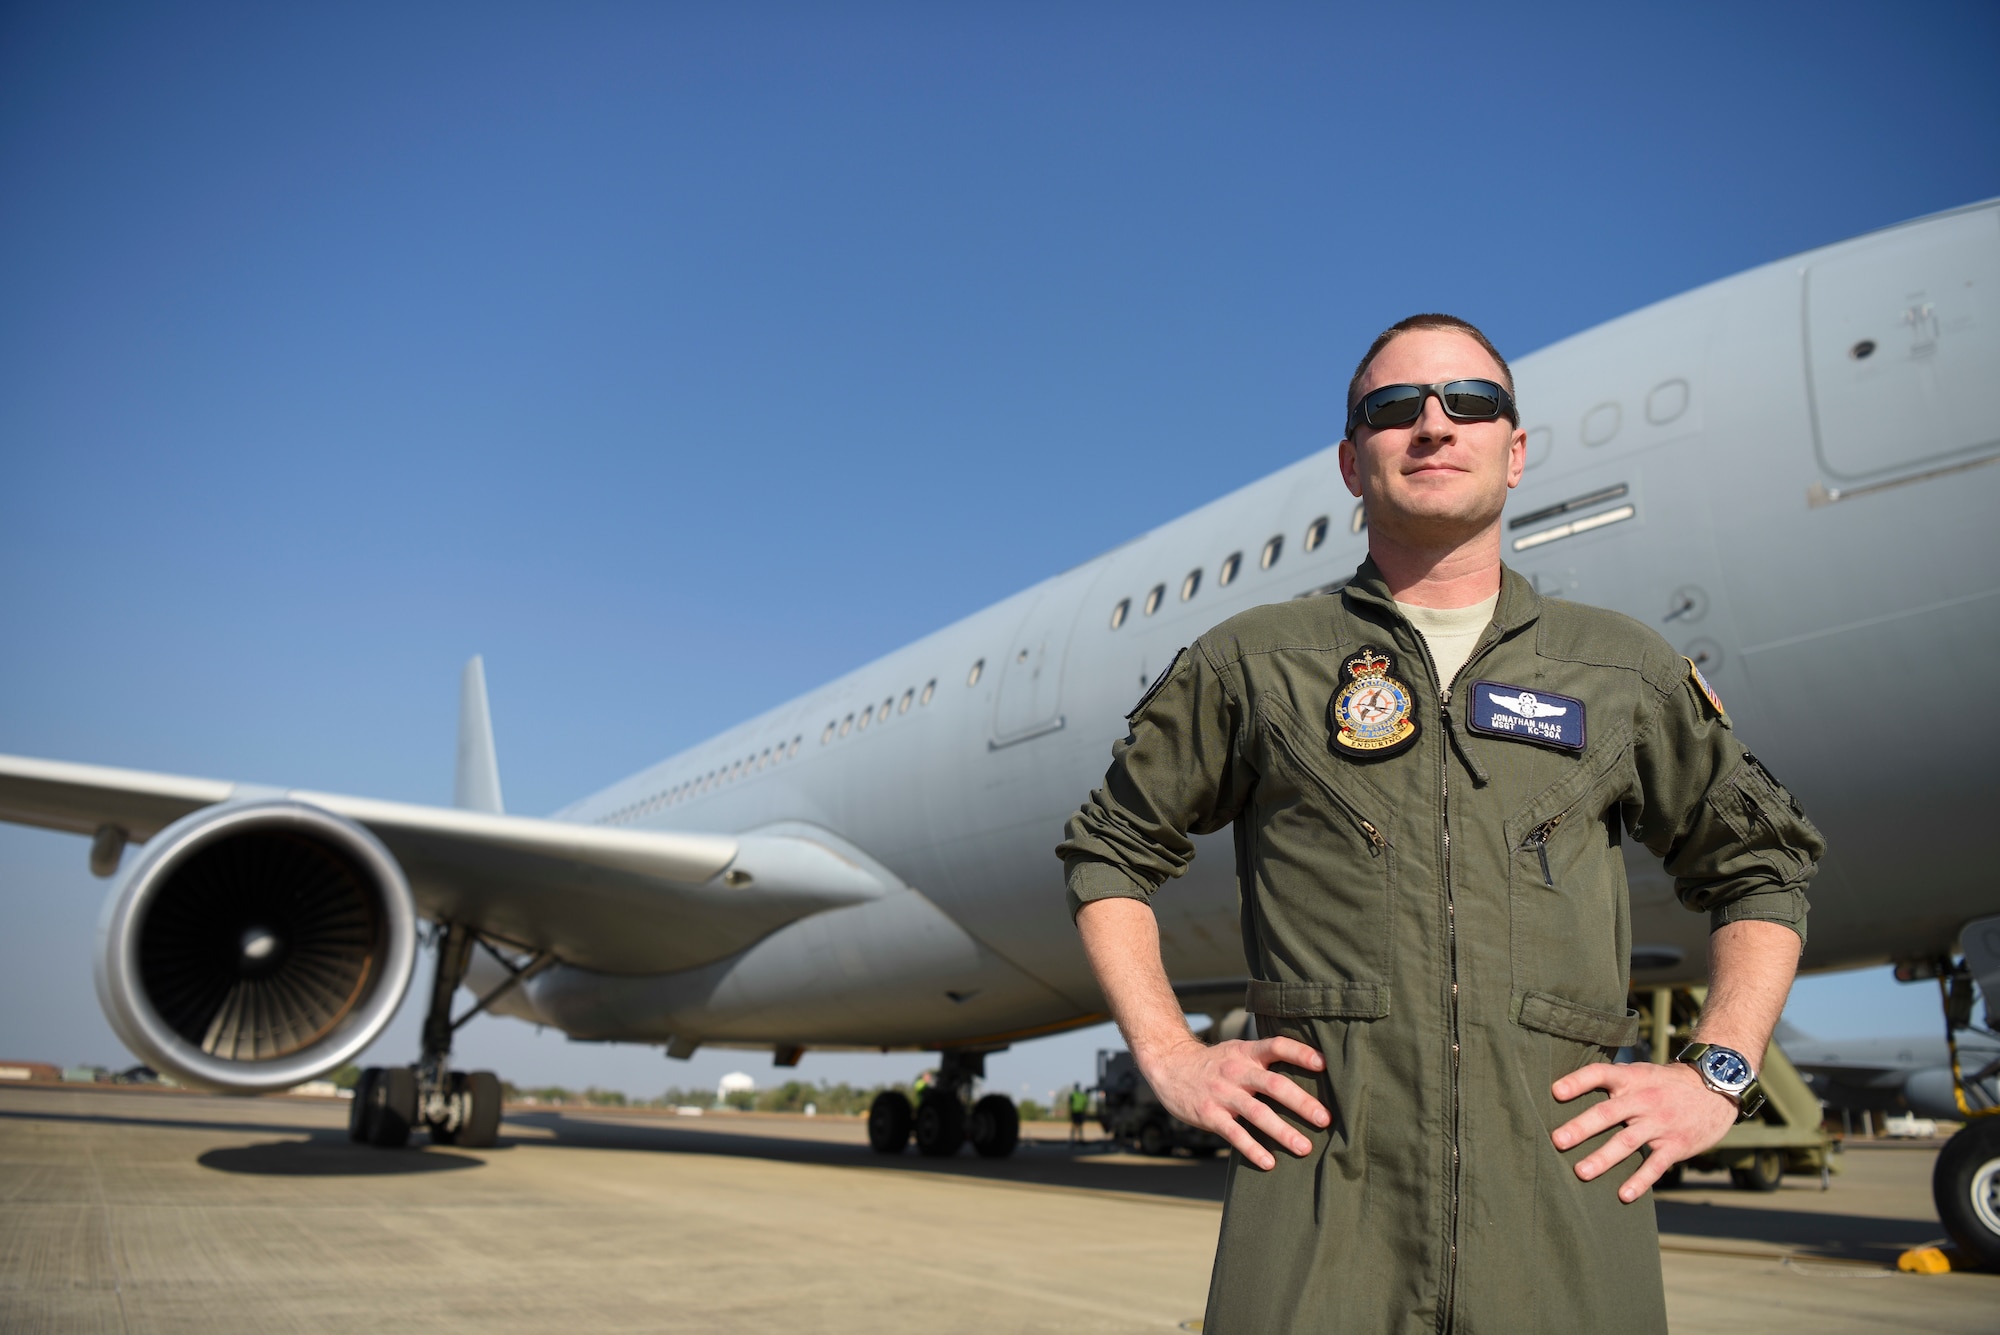 U.S. Air Force Master Sgt. Jonathan Haas, Royal Australian Air Force 33rd Squadron KC-30A Multi-Role Tanker Transport air-refueling operator, poses for a photo at RAAF Base Darwin, Australia, Aug. 8, 2018. Haas has spent the last two years based out of RAAF Base Amberley, Australia, serving as an instructor in the USAF Military Personnel Exchange Program. (U.S. Air Force photo by Senior Airman Savannah L. Waters)